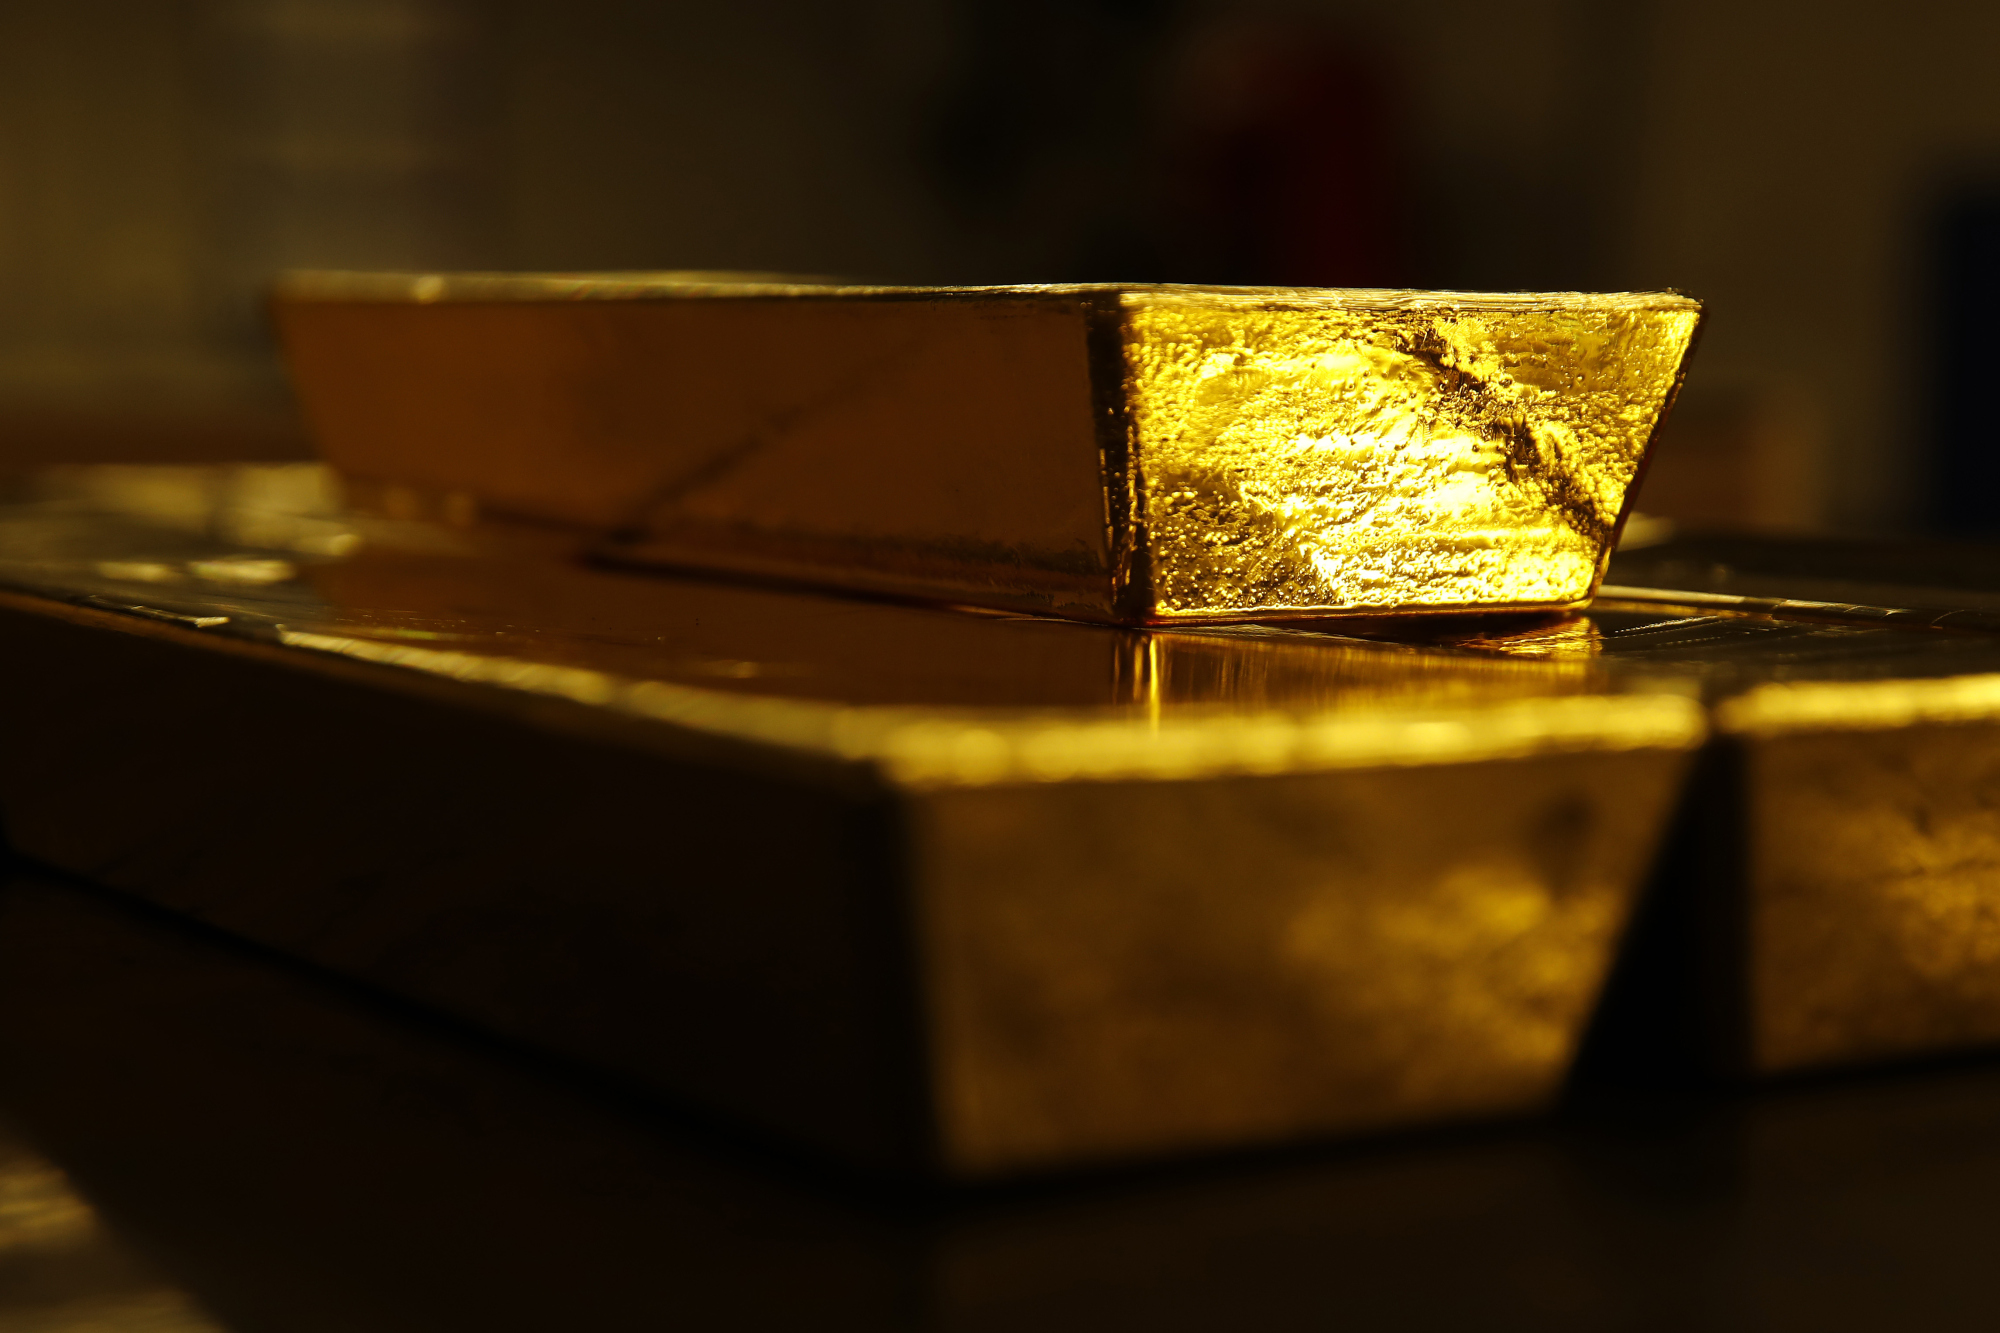 Gold Is No Longer a Good Hedge Against Bad Times - Bloomberg